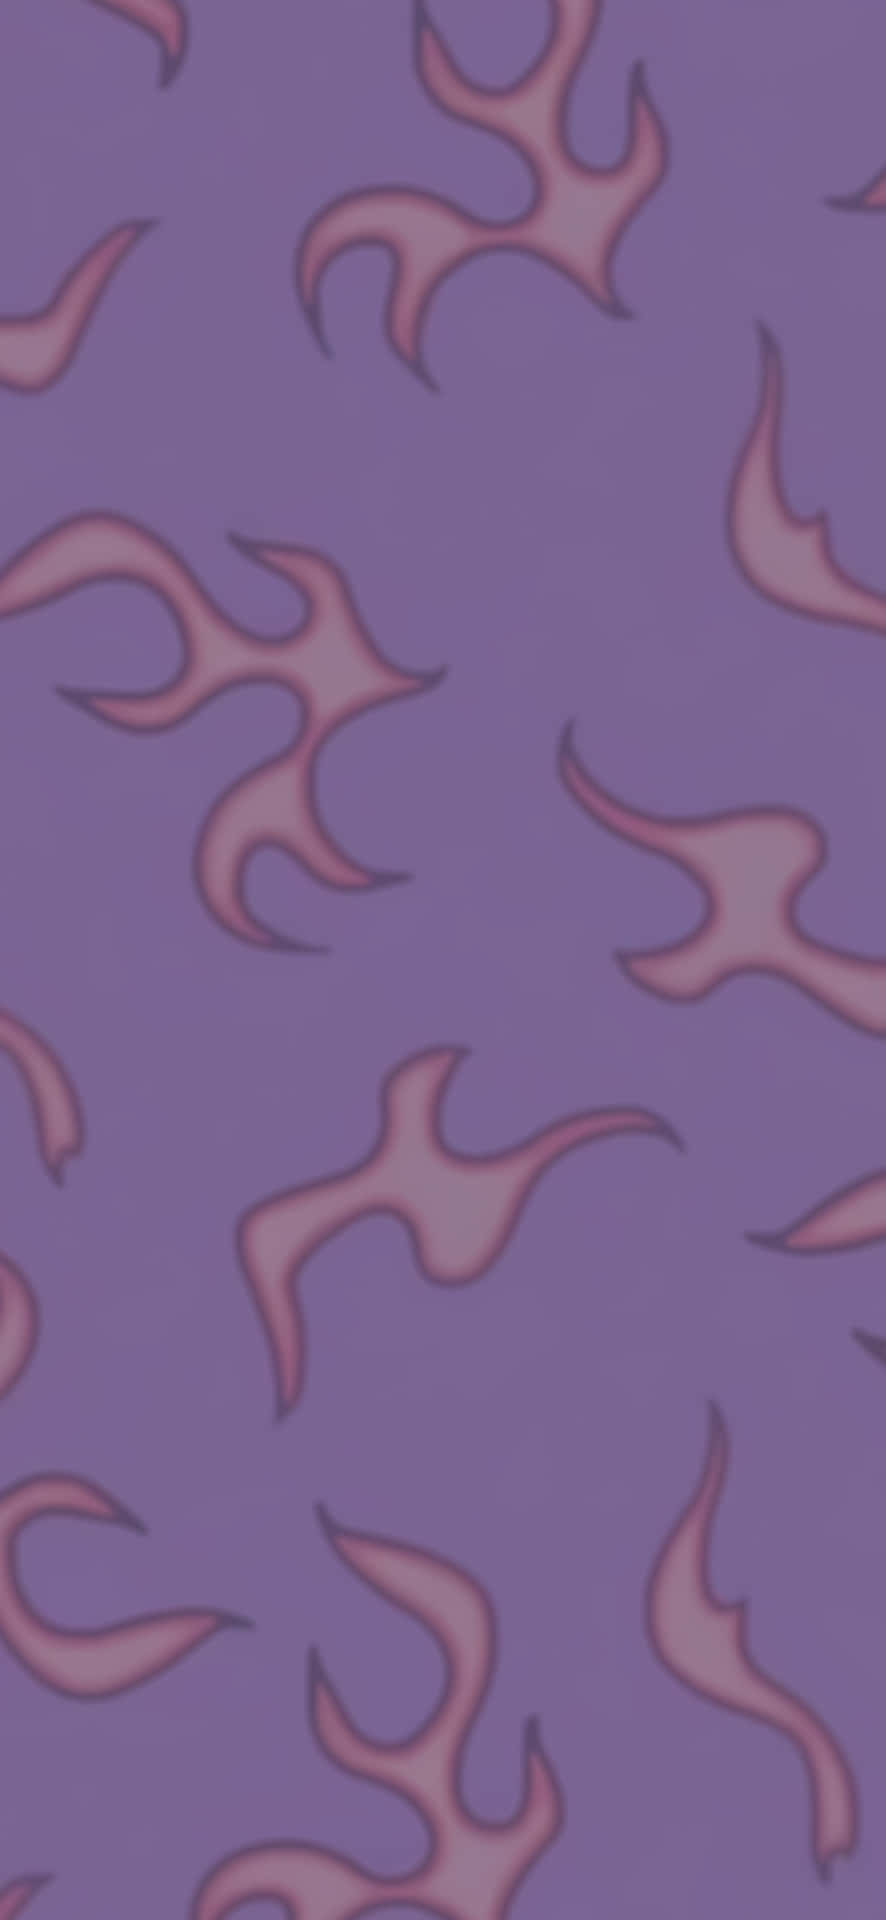 Lavender Patternwith Pink Accents.jpg Wallpaper